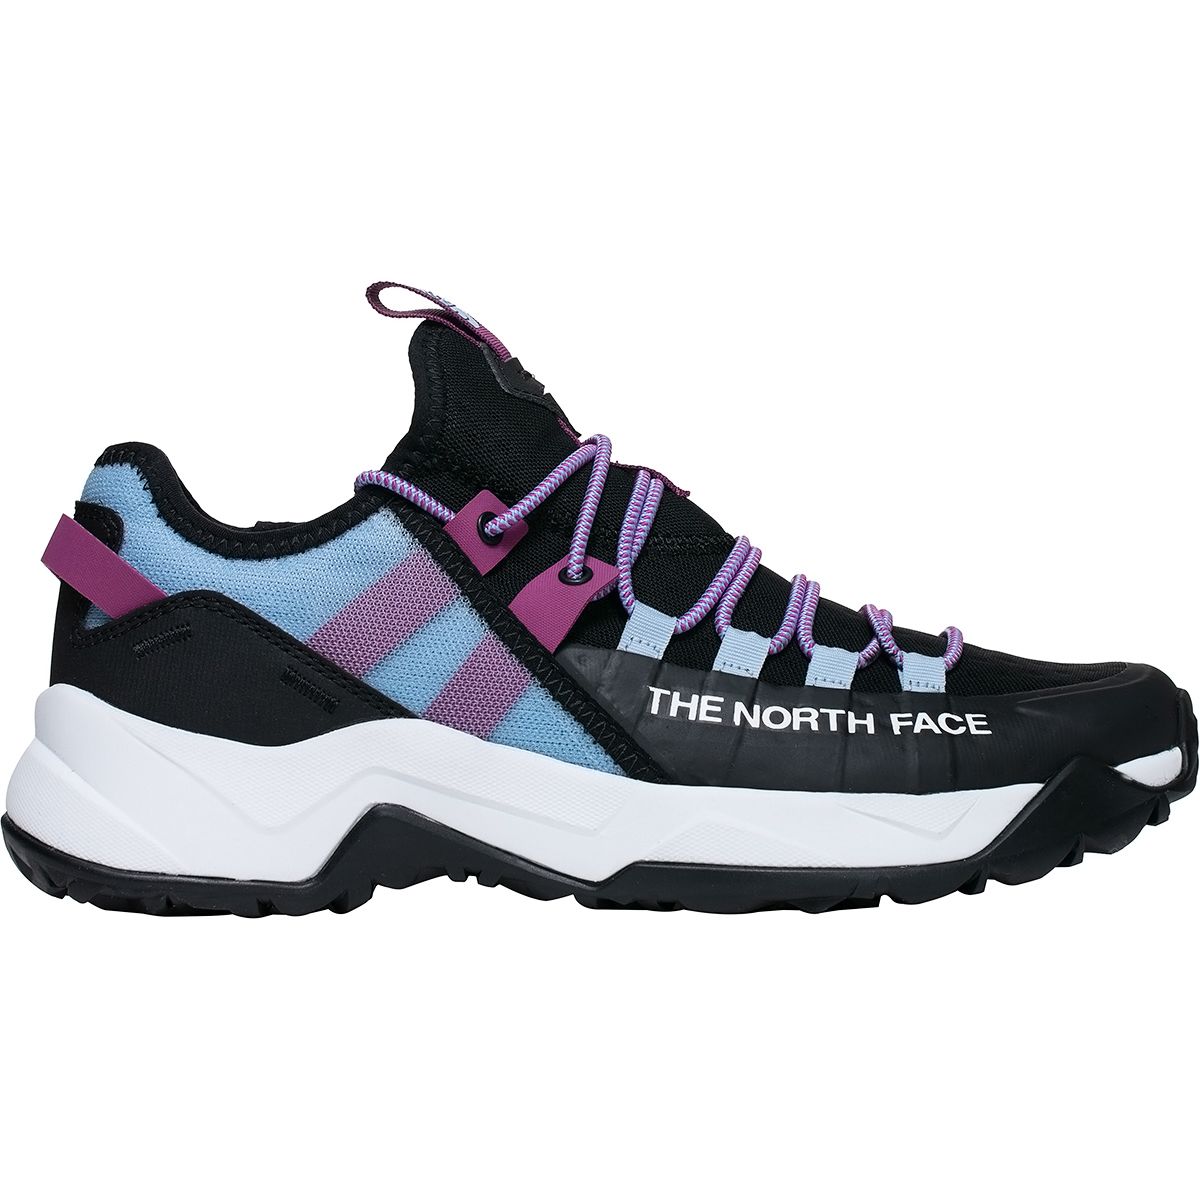 the north face women's tennis shoes